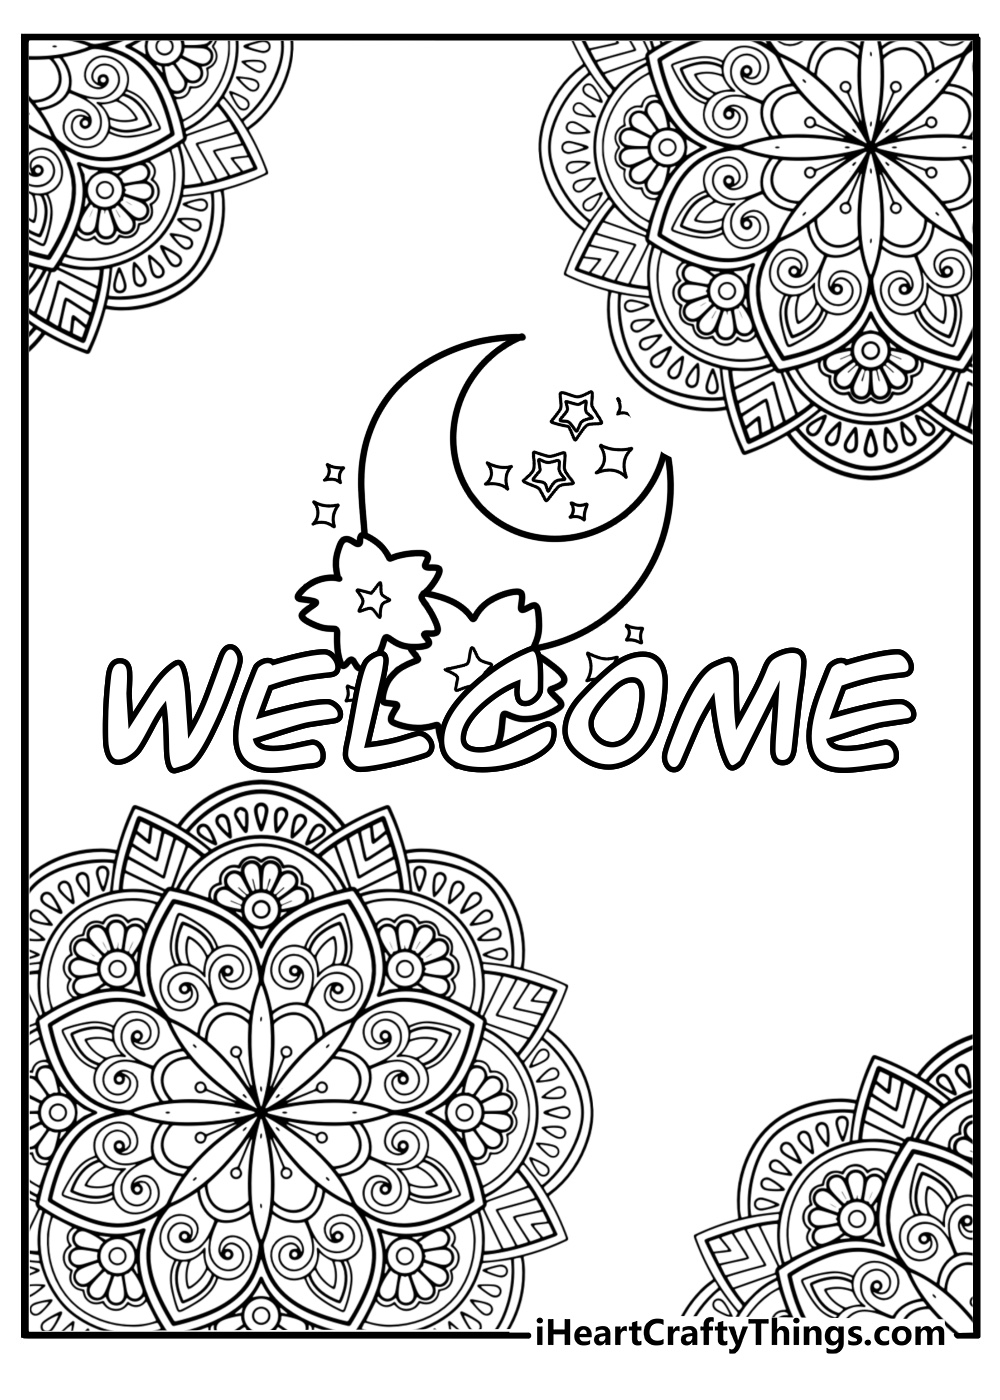 Welcome coloring pages for adults